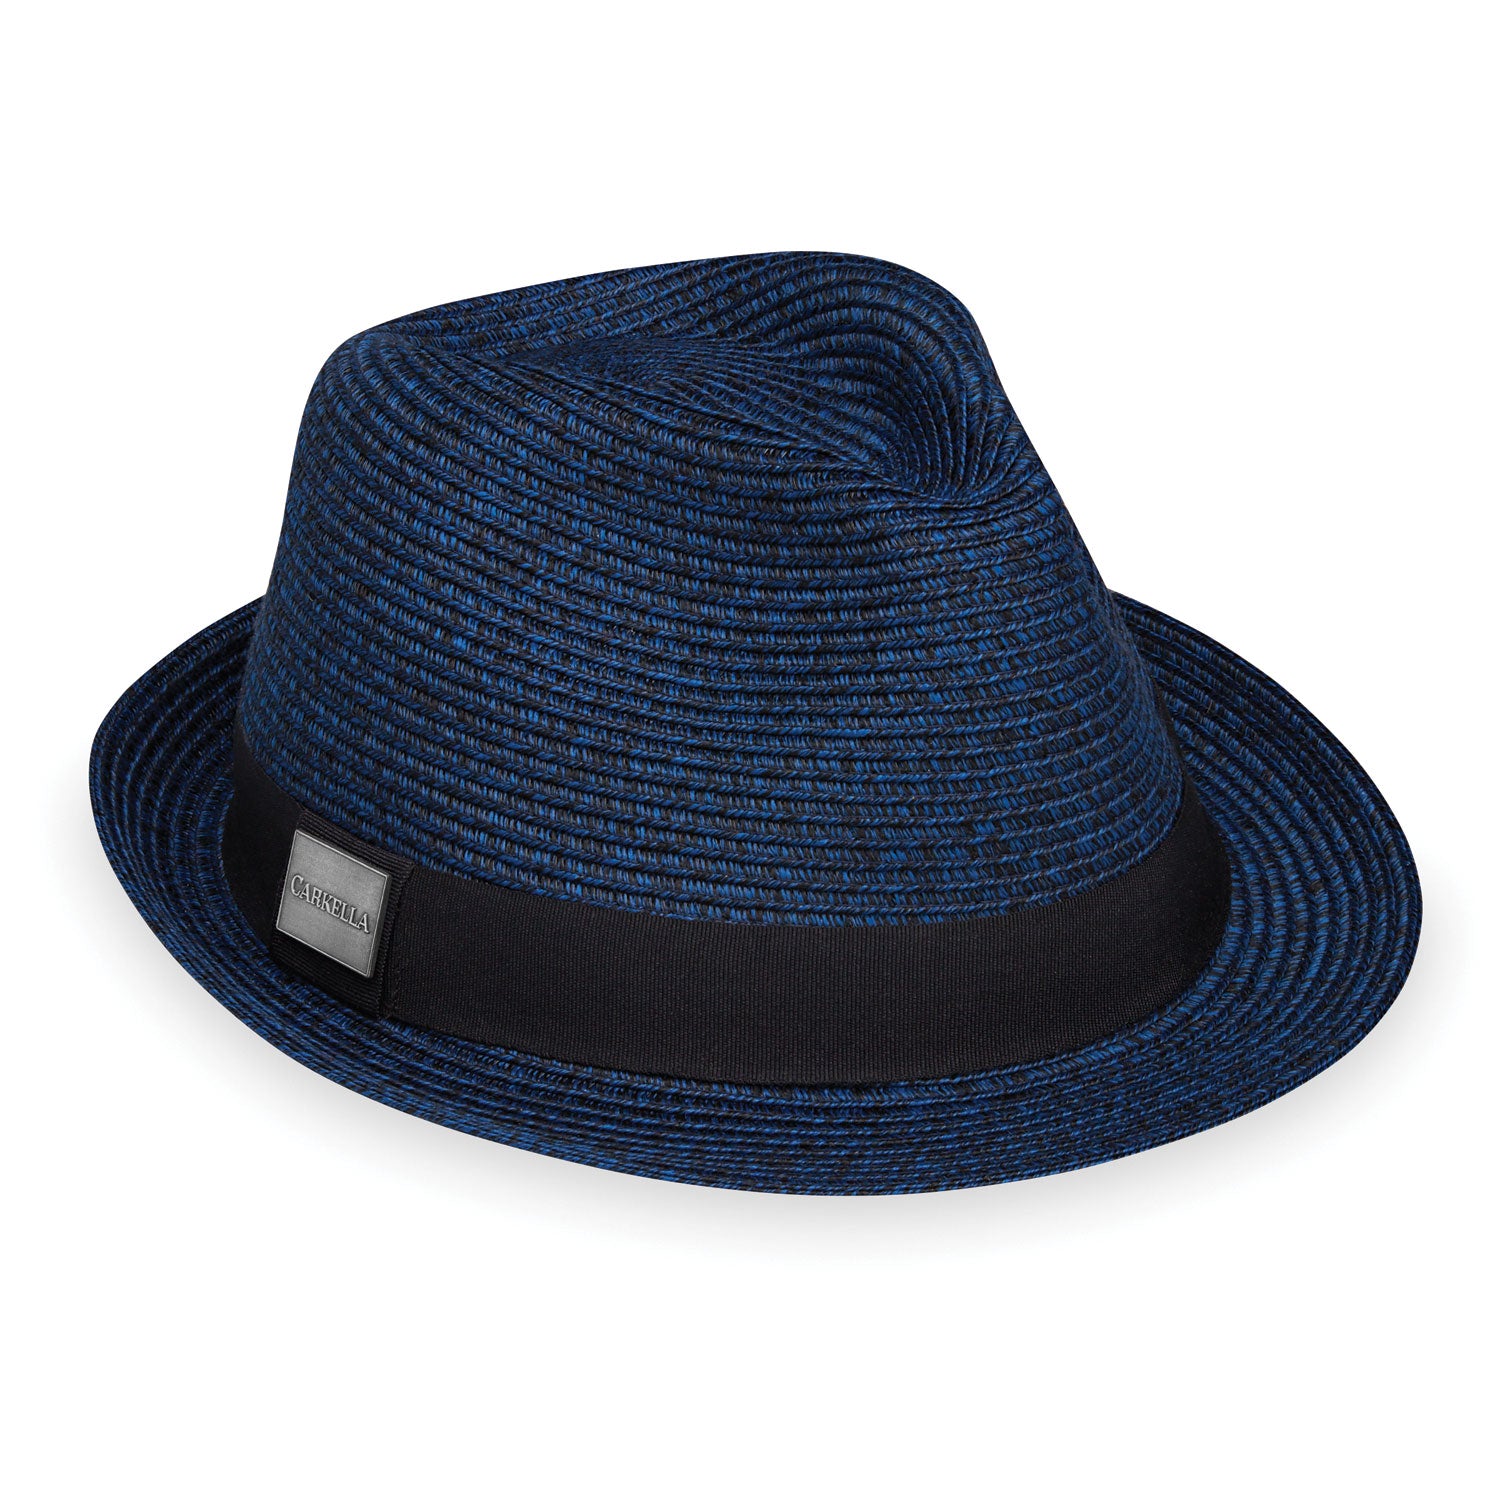 Featuring Carkella Del Mar trilby style fedora for both men and women